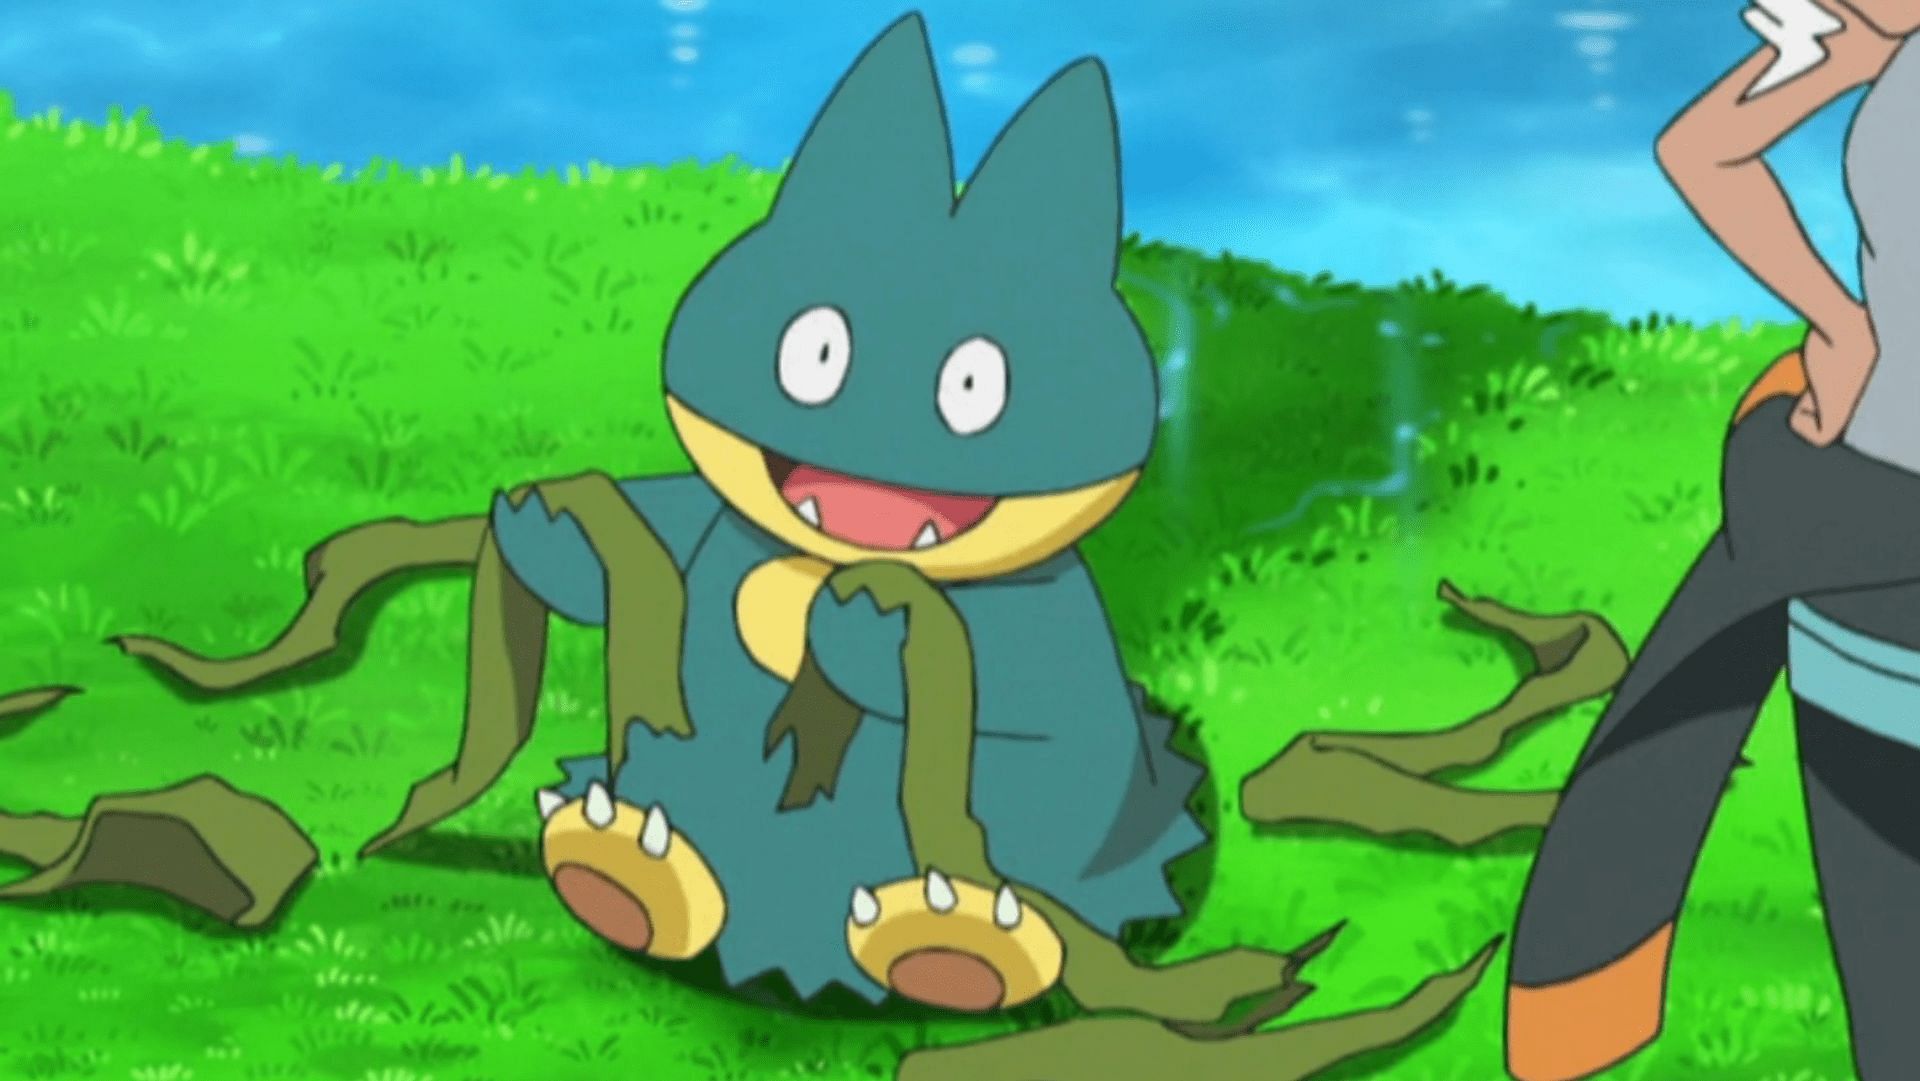 Munchlax as it appears in the anime (Image via The Pokemon Company)